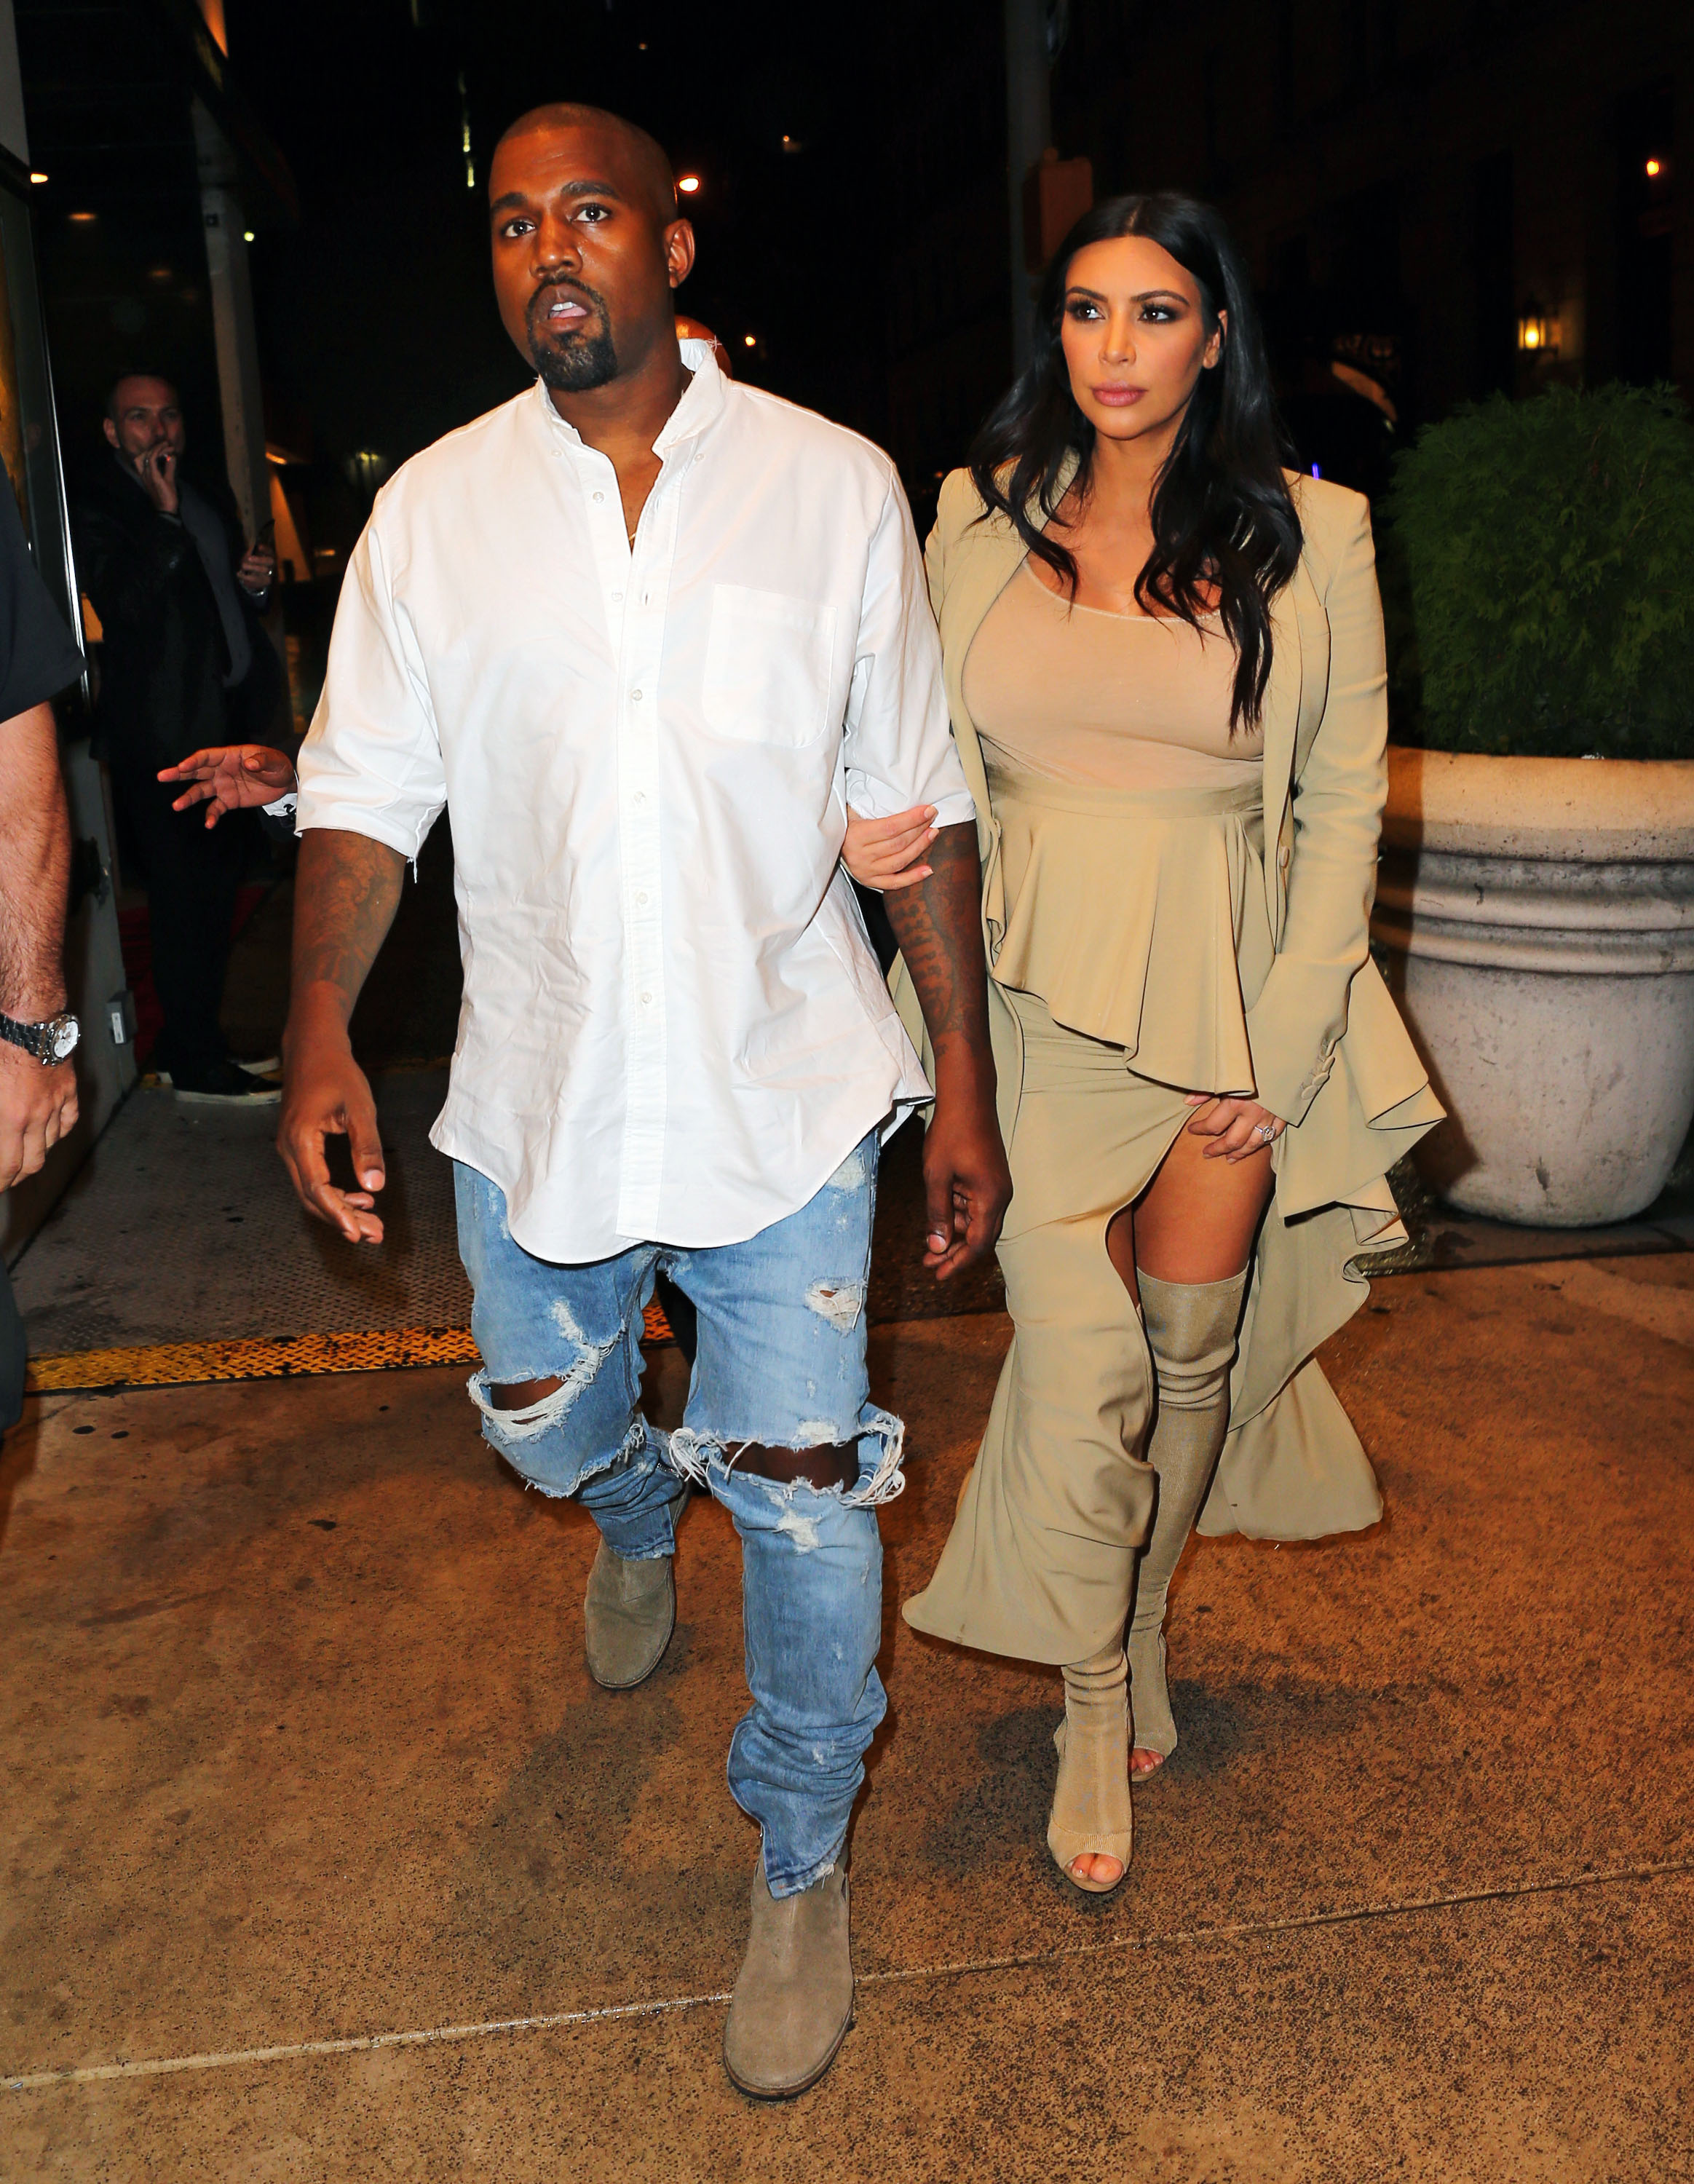 Kanye West and Kim Kardashian go to dinner in the rain in Midtown